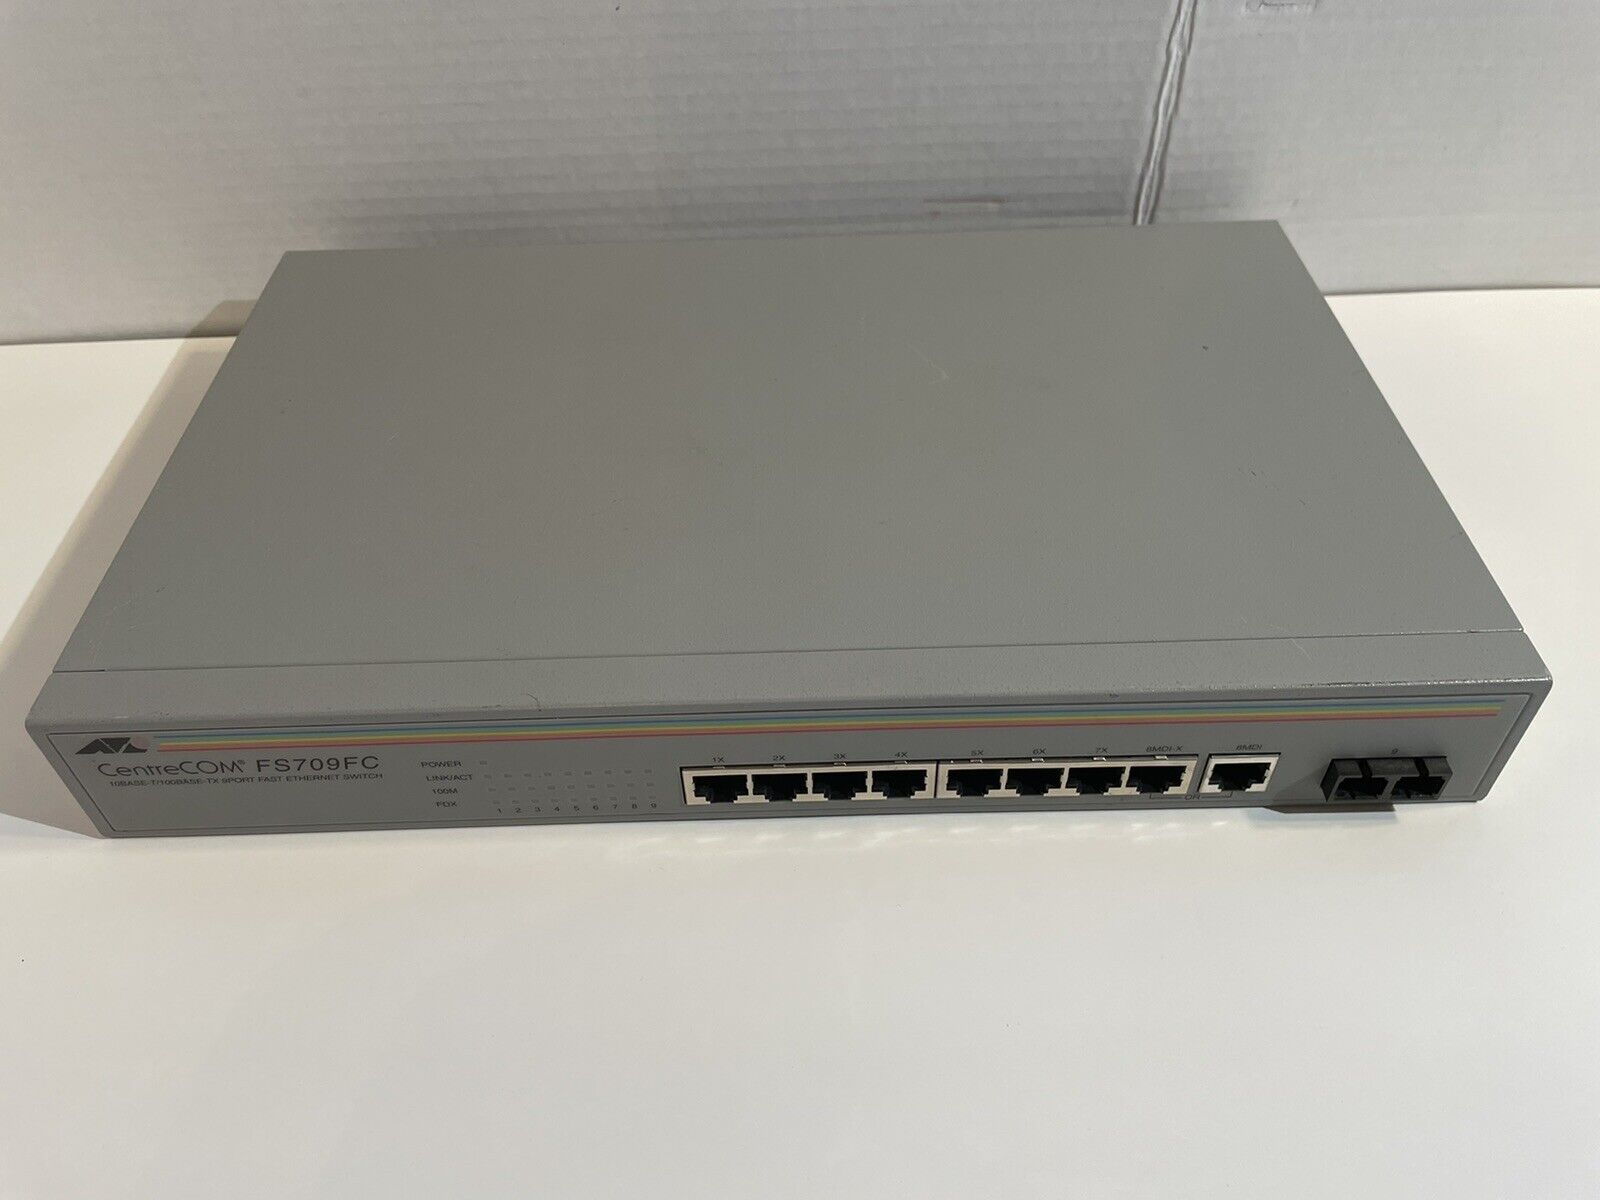 Allied Telesyn AT-FS709FC 8-Port 10/100 Mbps Fast Ethernet Switch